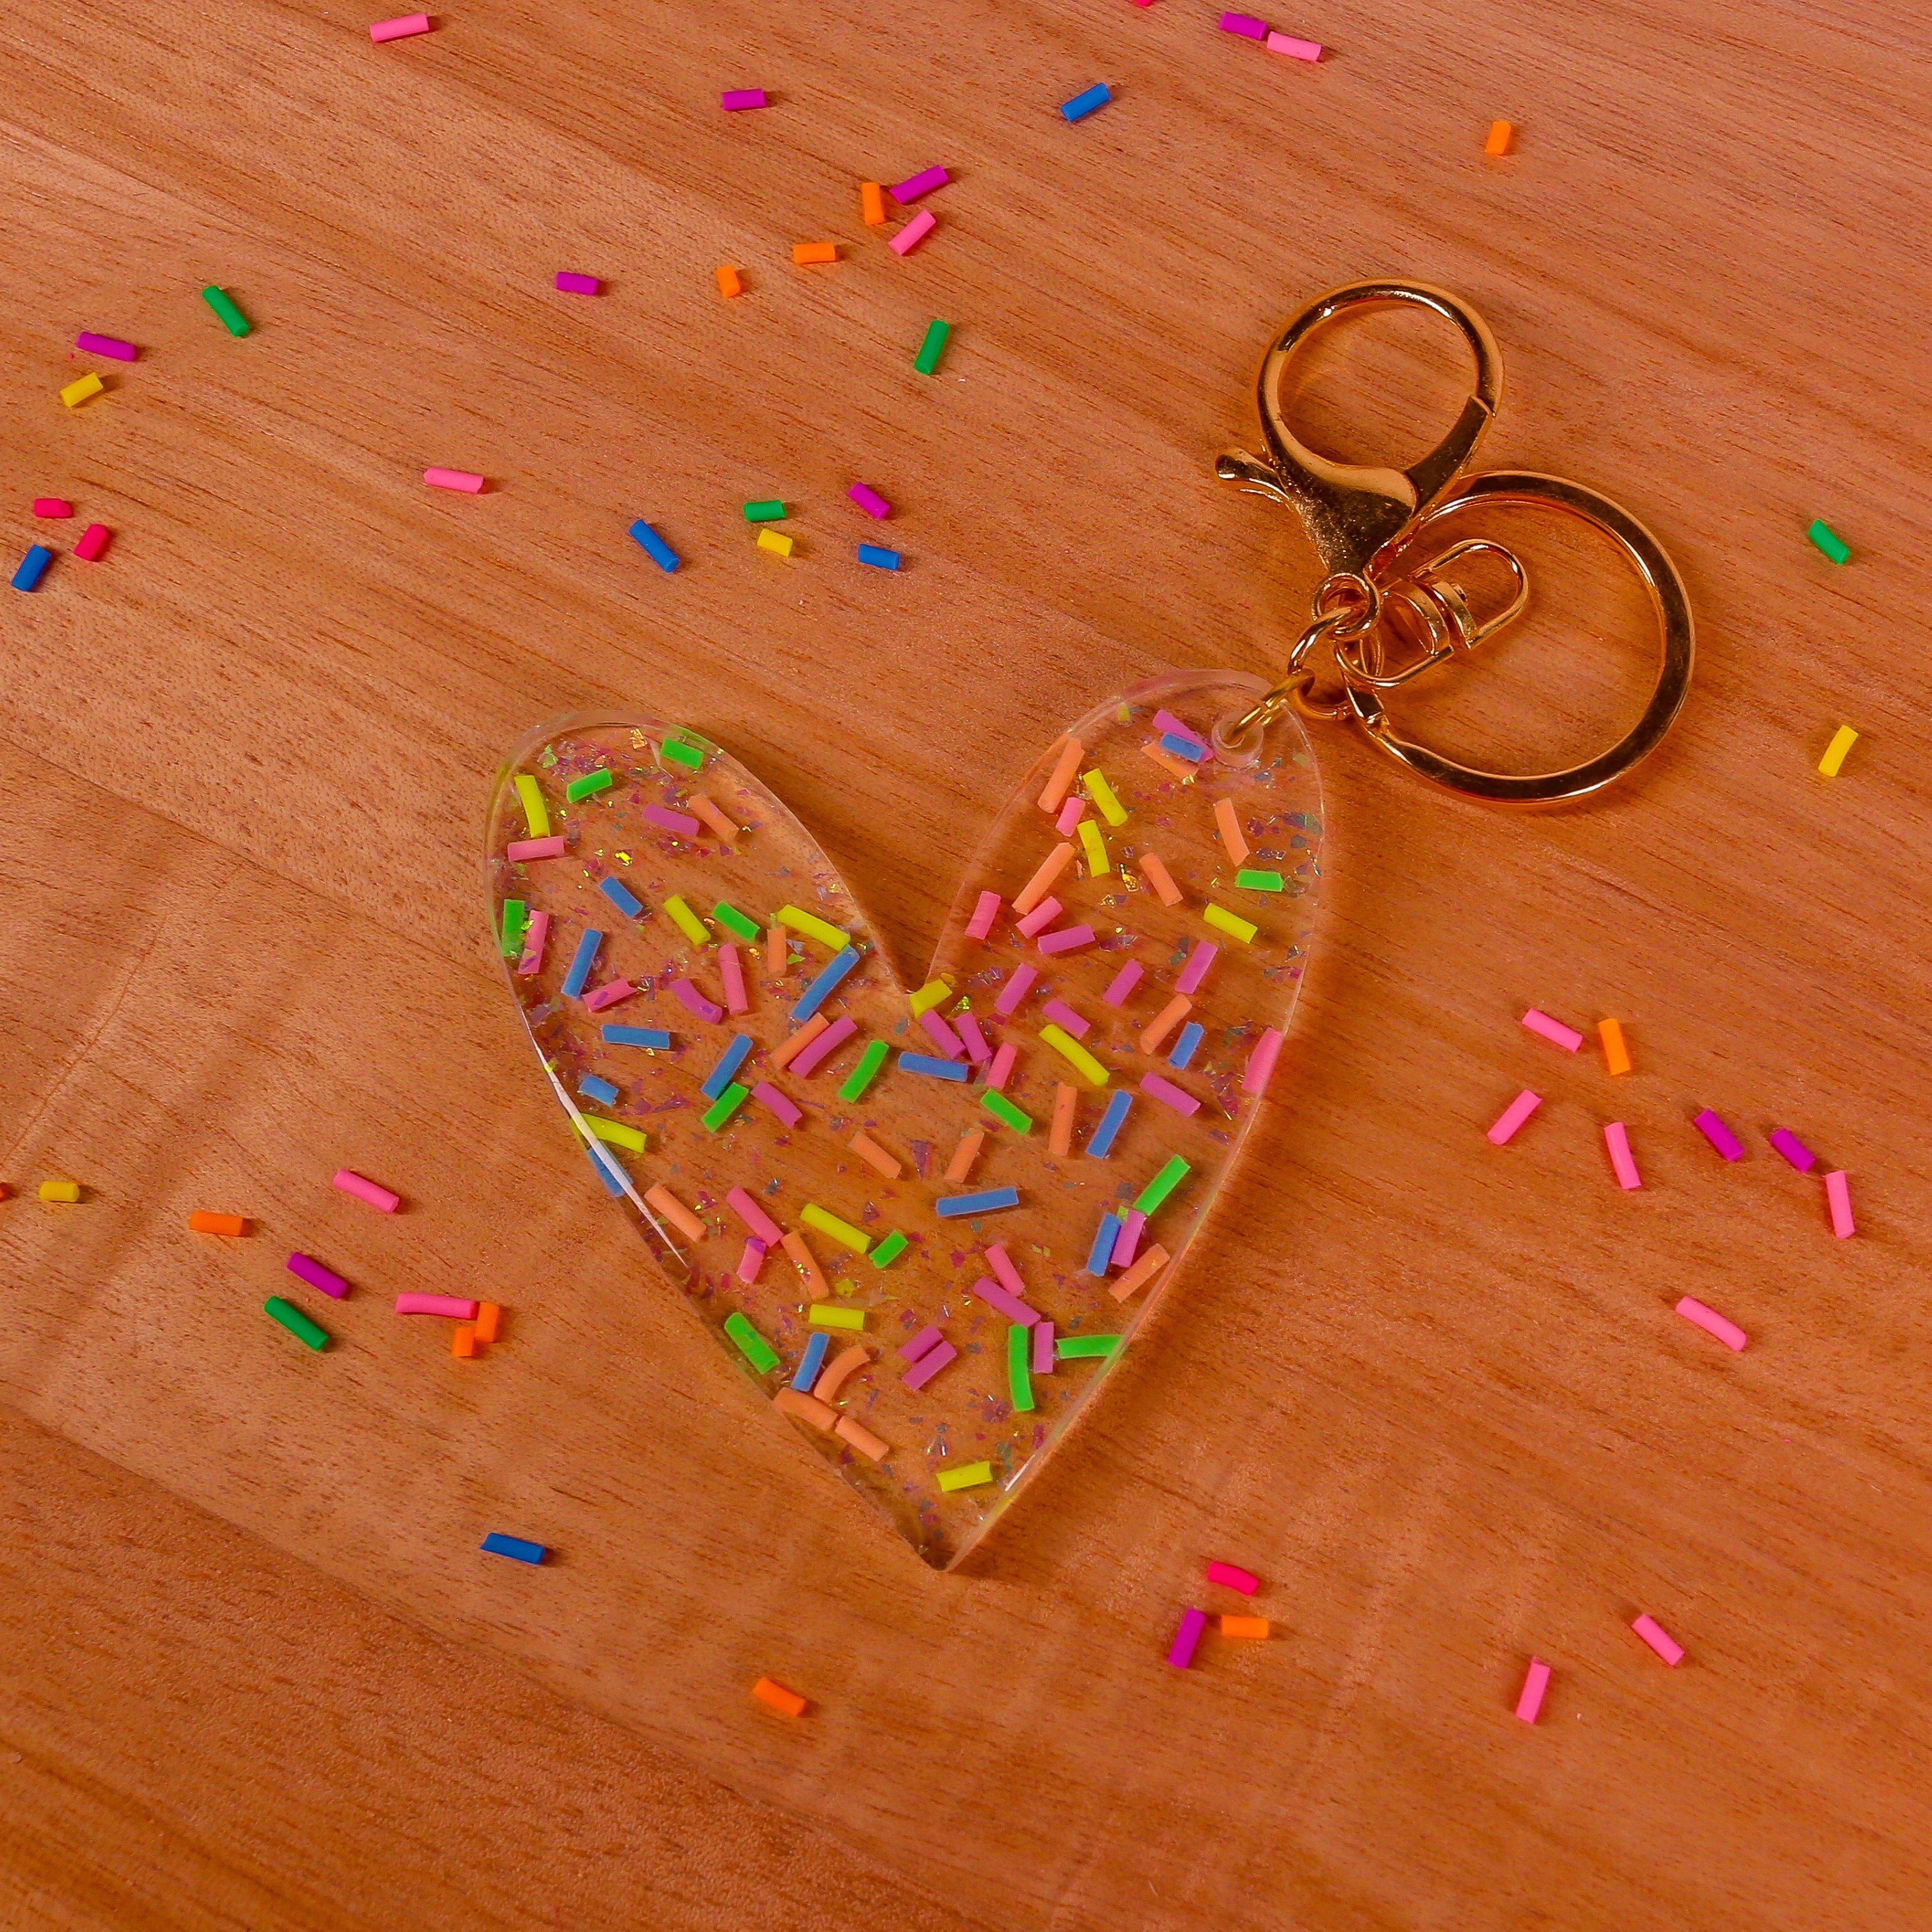 SPRINKLES HEART KEY RING  - LOLLY POLLY X NEON HEART DESIGNS